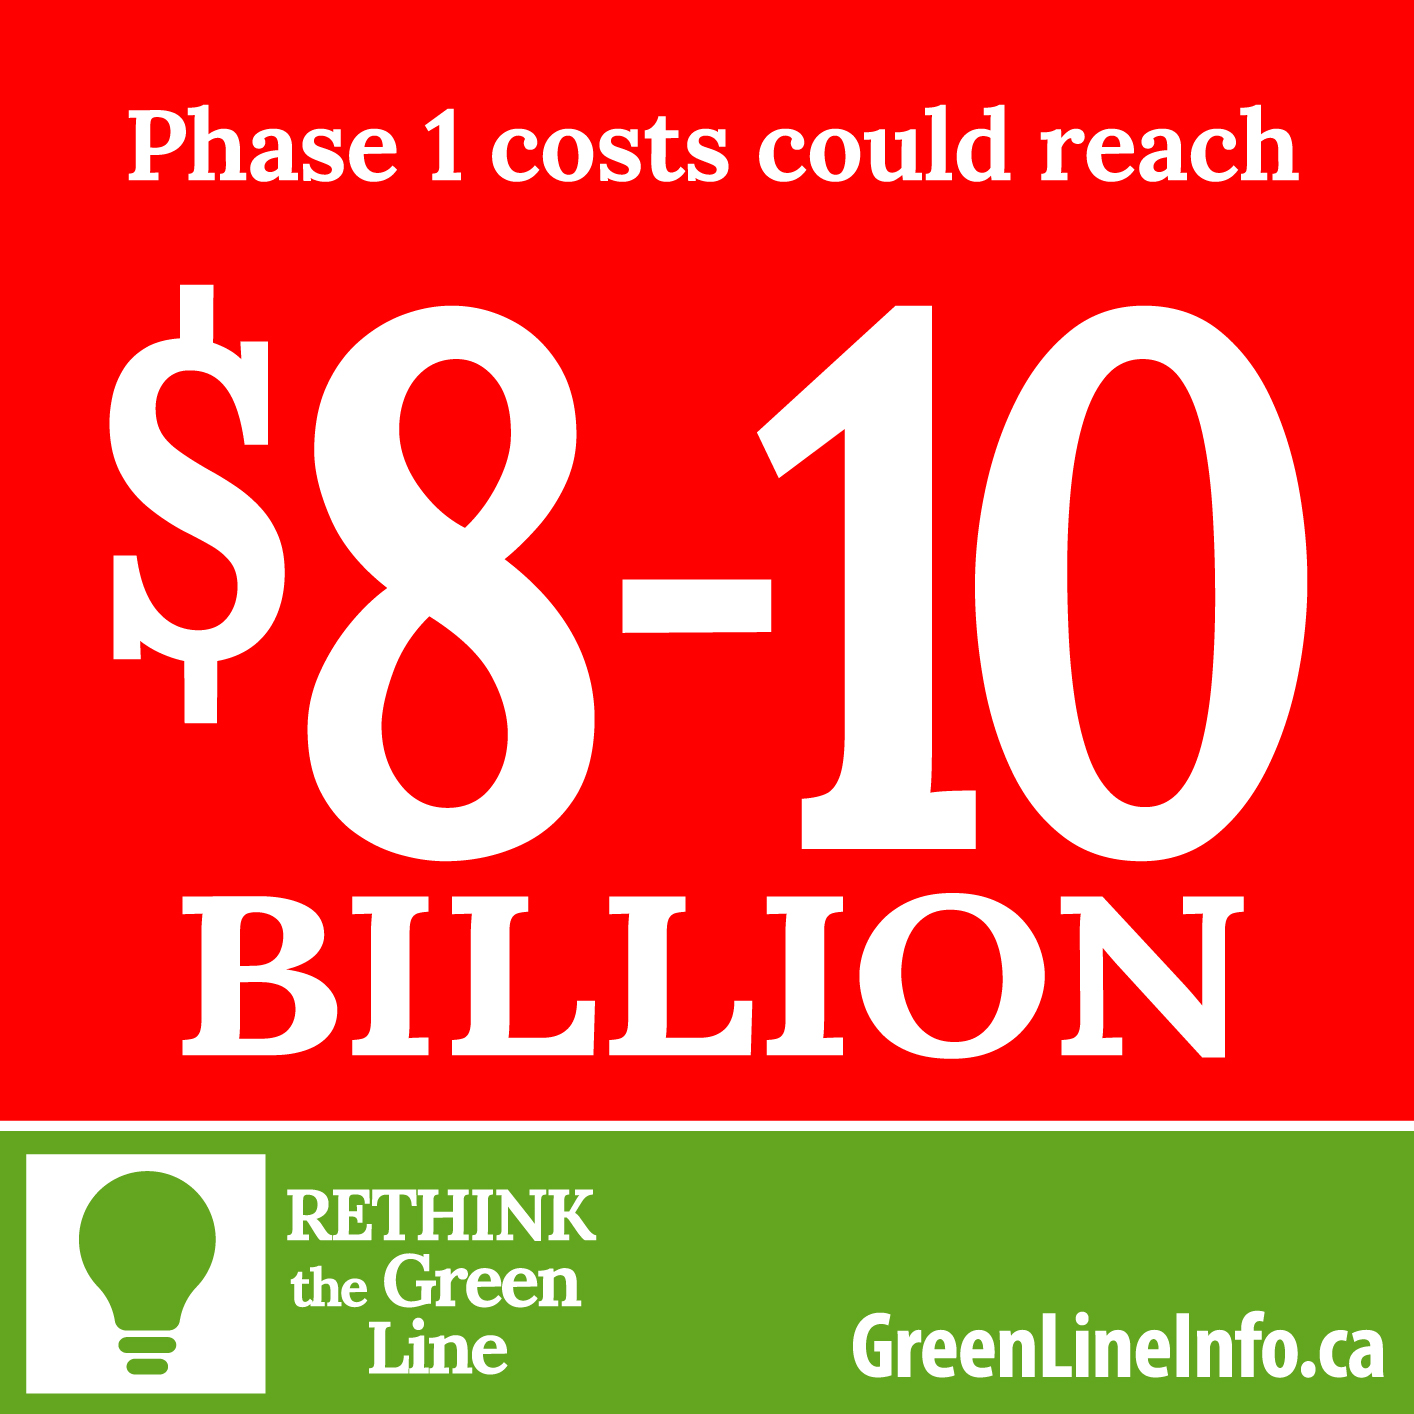 Phase 1 costs could reach $8-10 Billion